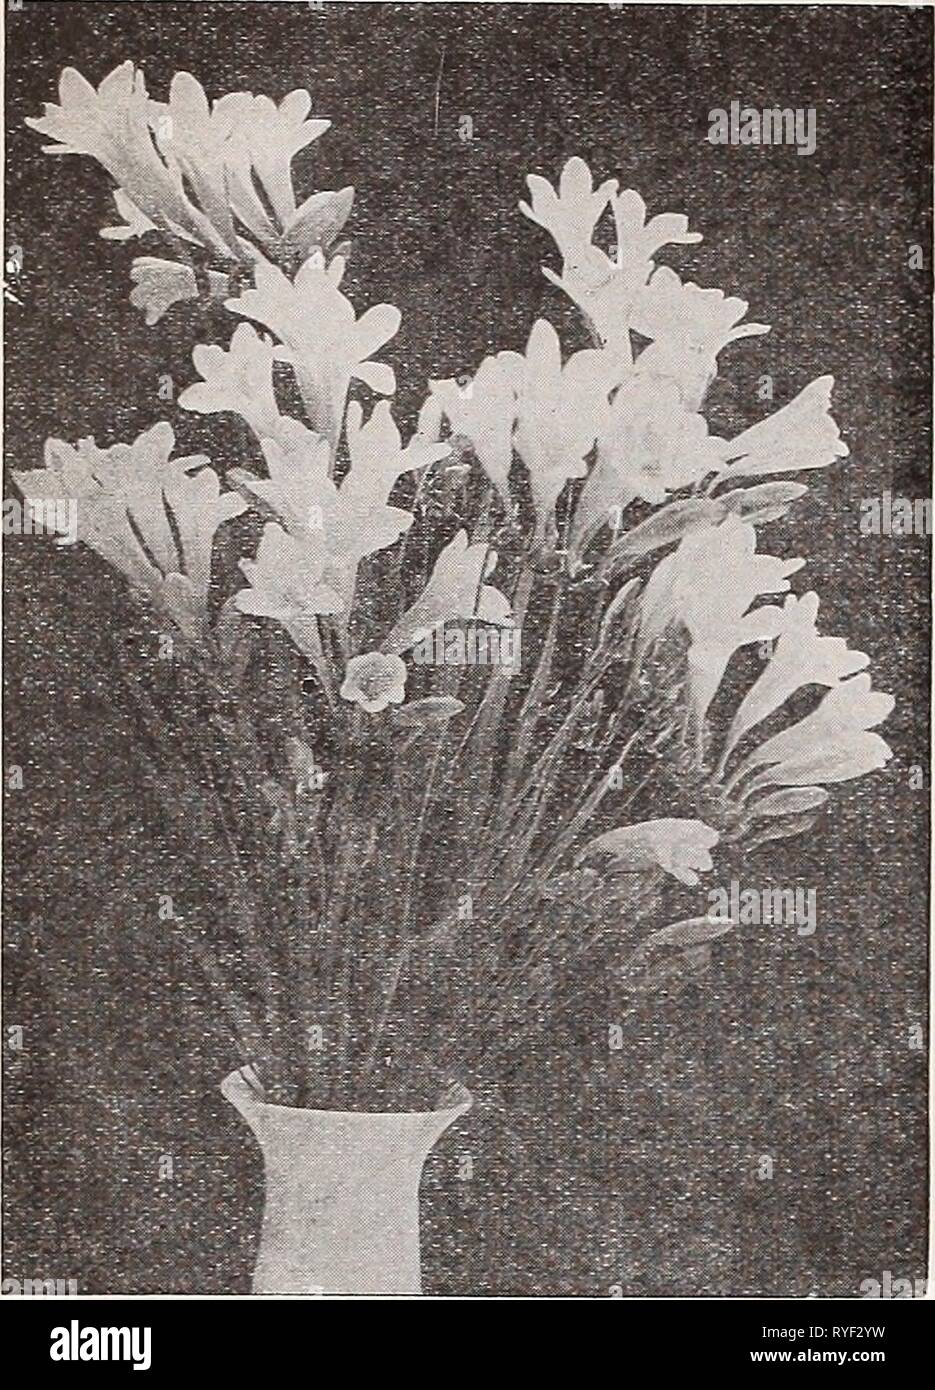 Dreer's wholesale price list for florists : flower seeds lawn grass seeds bulbs plants sundries  dreerswholesalep1933henr 0 Year: 1933  18 HENRY A. DREER Bulbs WHOLESALE LIST    Drecr's Improved Purity Freeslas Lilies for Easter Flowering Easter in 1934 comes on April 1st Lilium Harrisii (Ready early August) Our bulbs are carefully selected from a strain which Is of remarkable strong free growth, and val- uable for early forcing. Bulbs per Doz. 100 Case Case 7 to 9-in 200 $2 00 $14 00 $25 00 9 to 11-in 100 3 50 25 00 25 00 Lilium Philippinense Formosanum (Ready in August) A remarliable lily wi Stock Photo